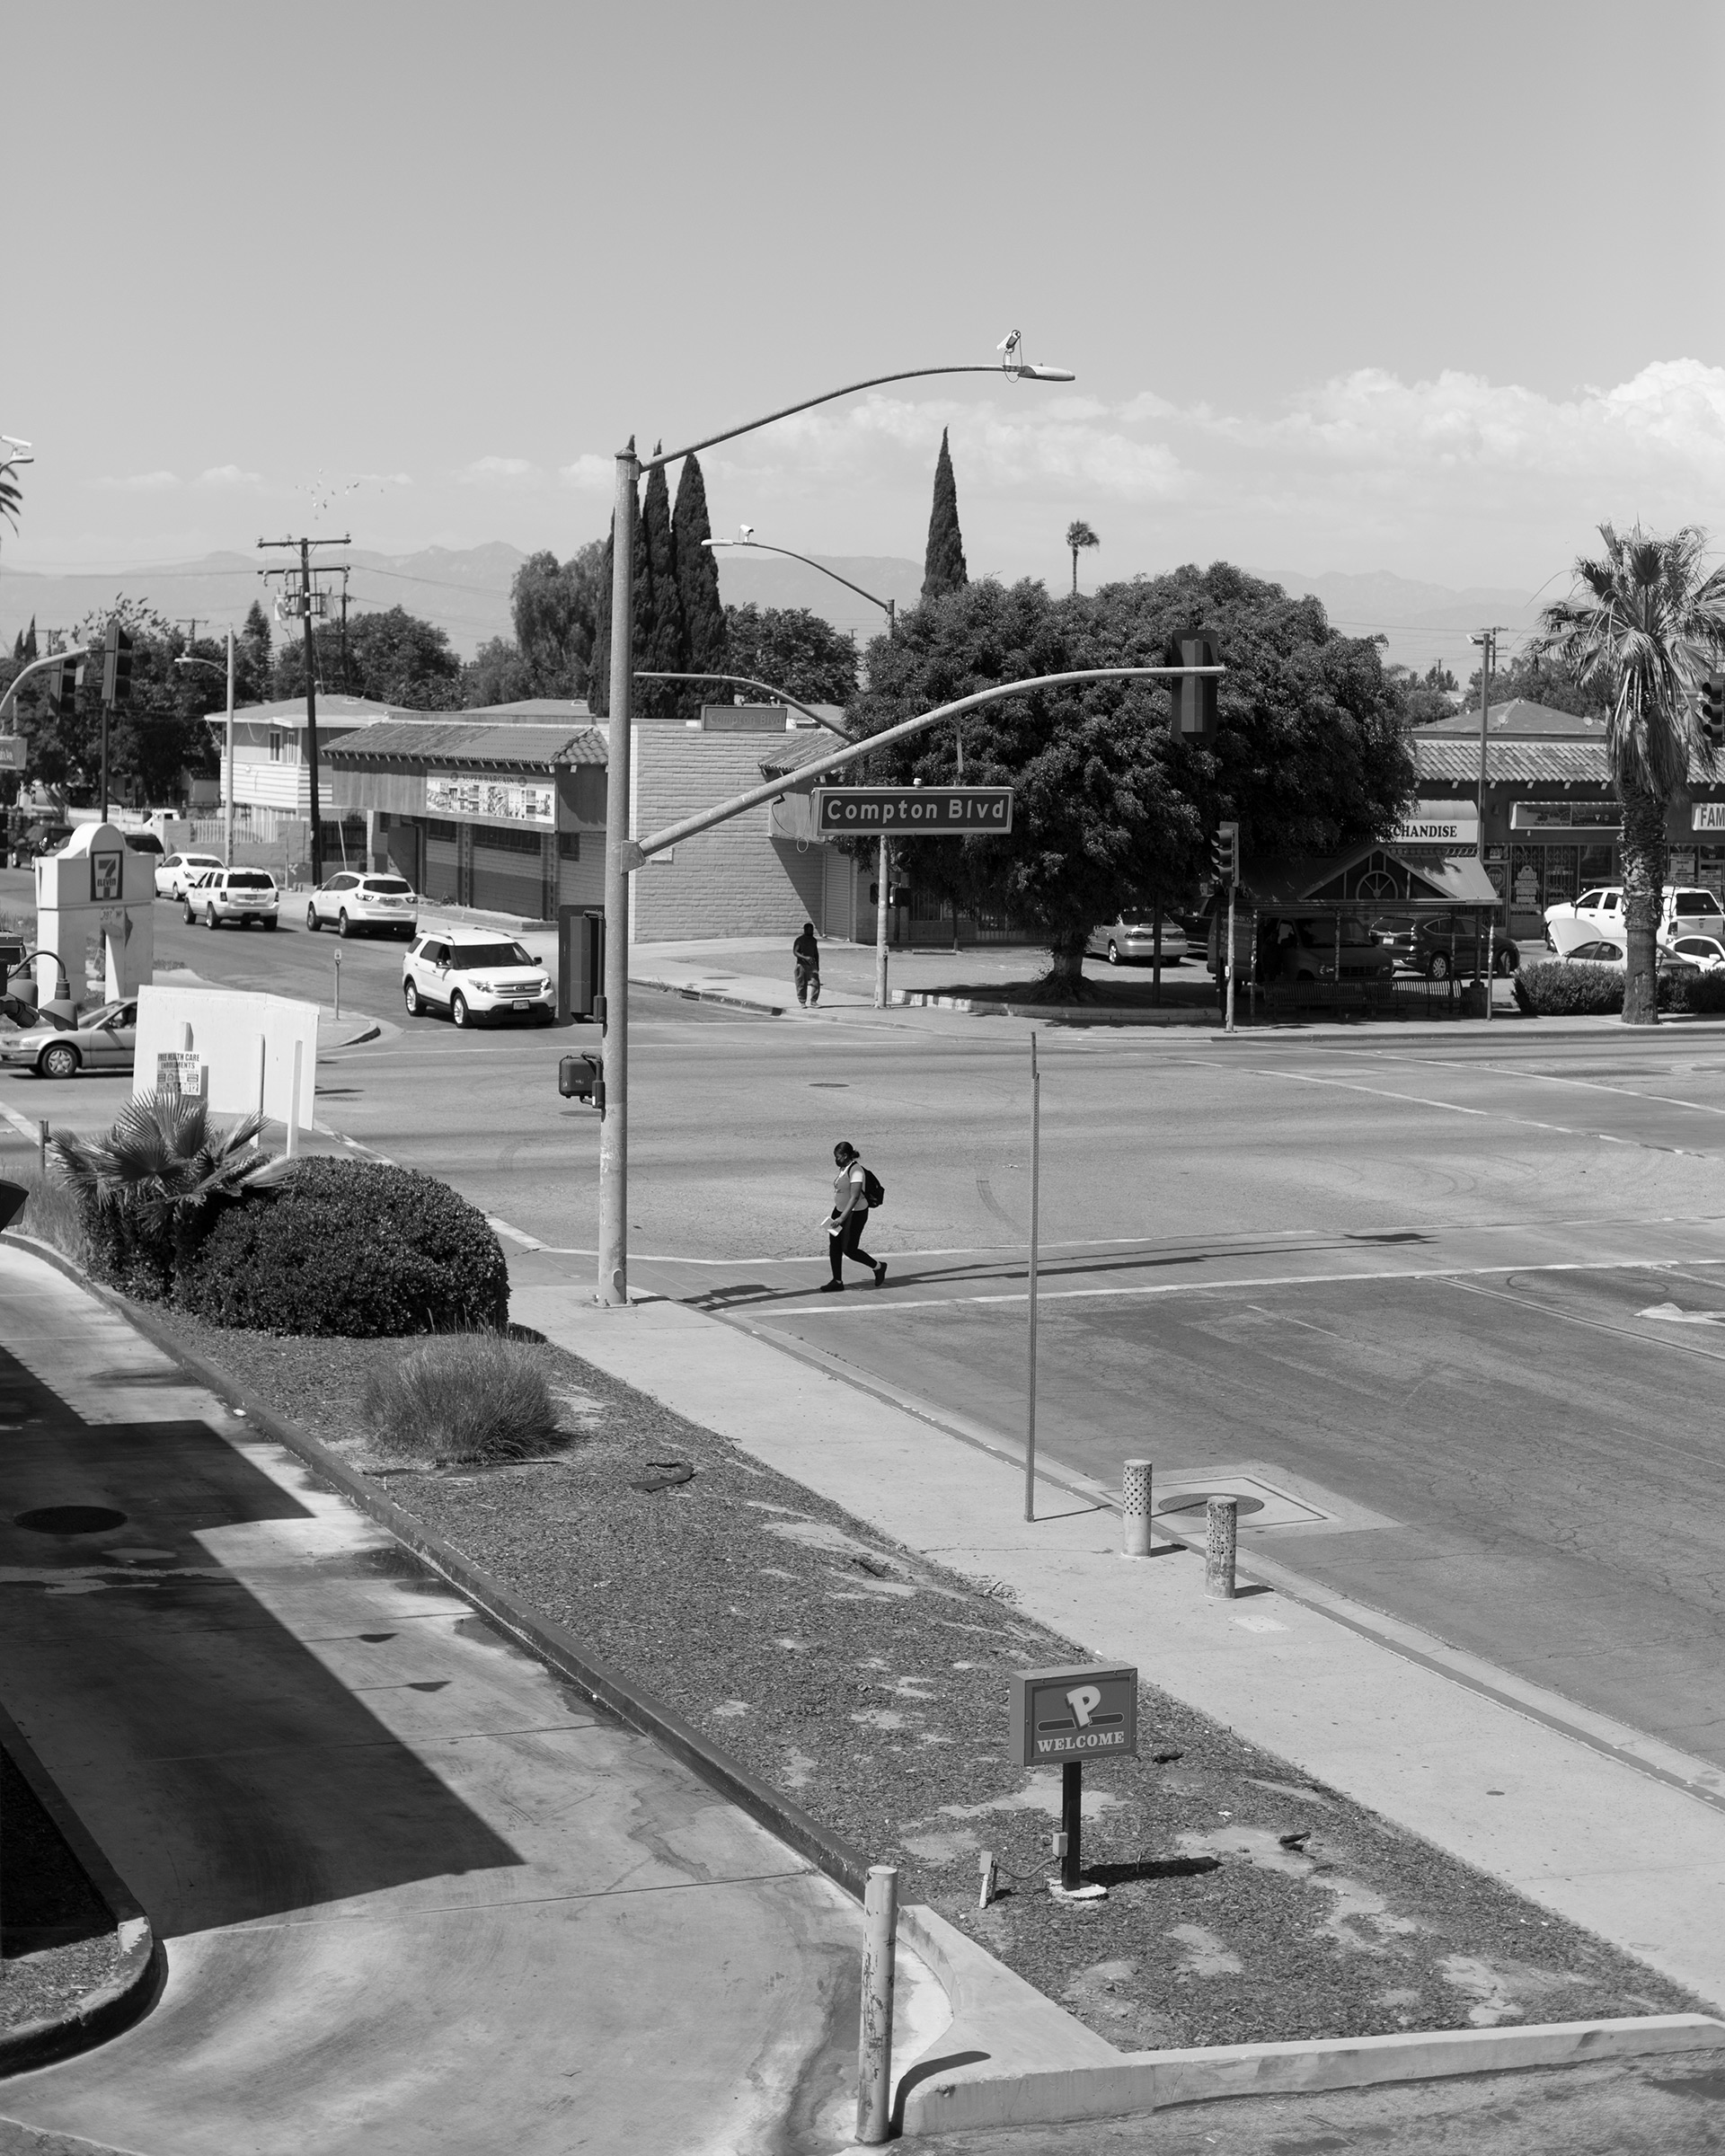 Compton's health and economic deficits are compounded by the absence of well-paying jobs and a high proportion of undocumented immigrants who lack health insurance. (Kovi Konowiecki for TIME)